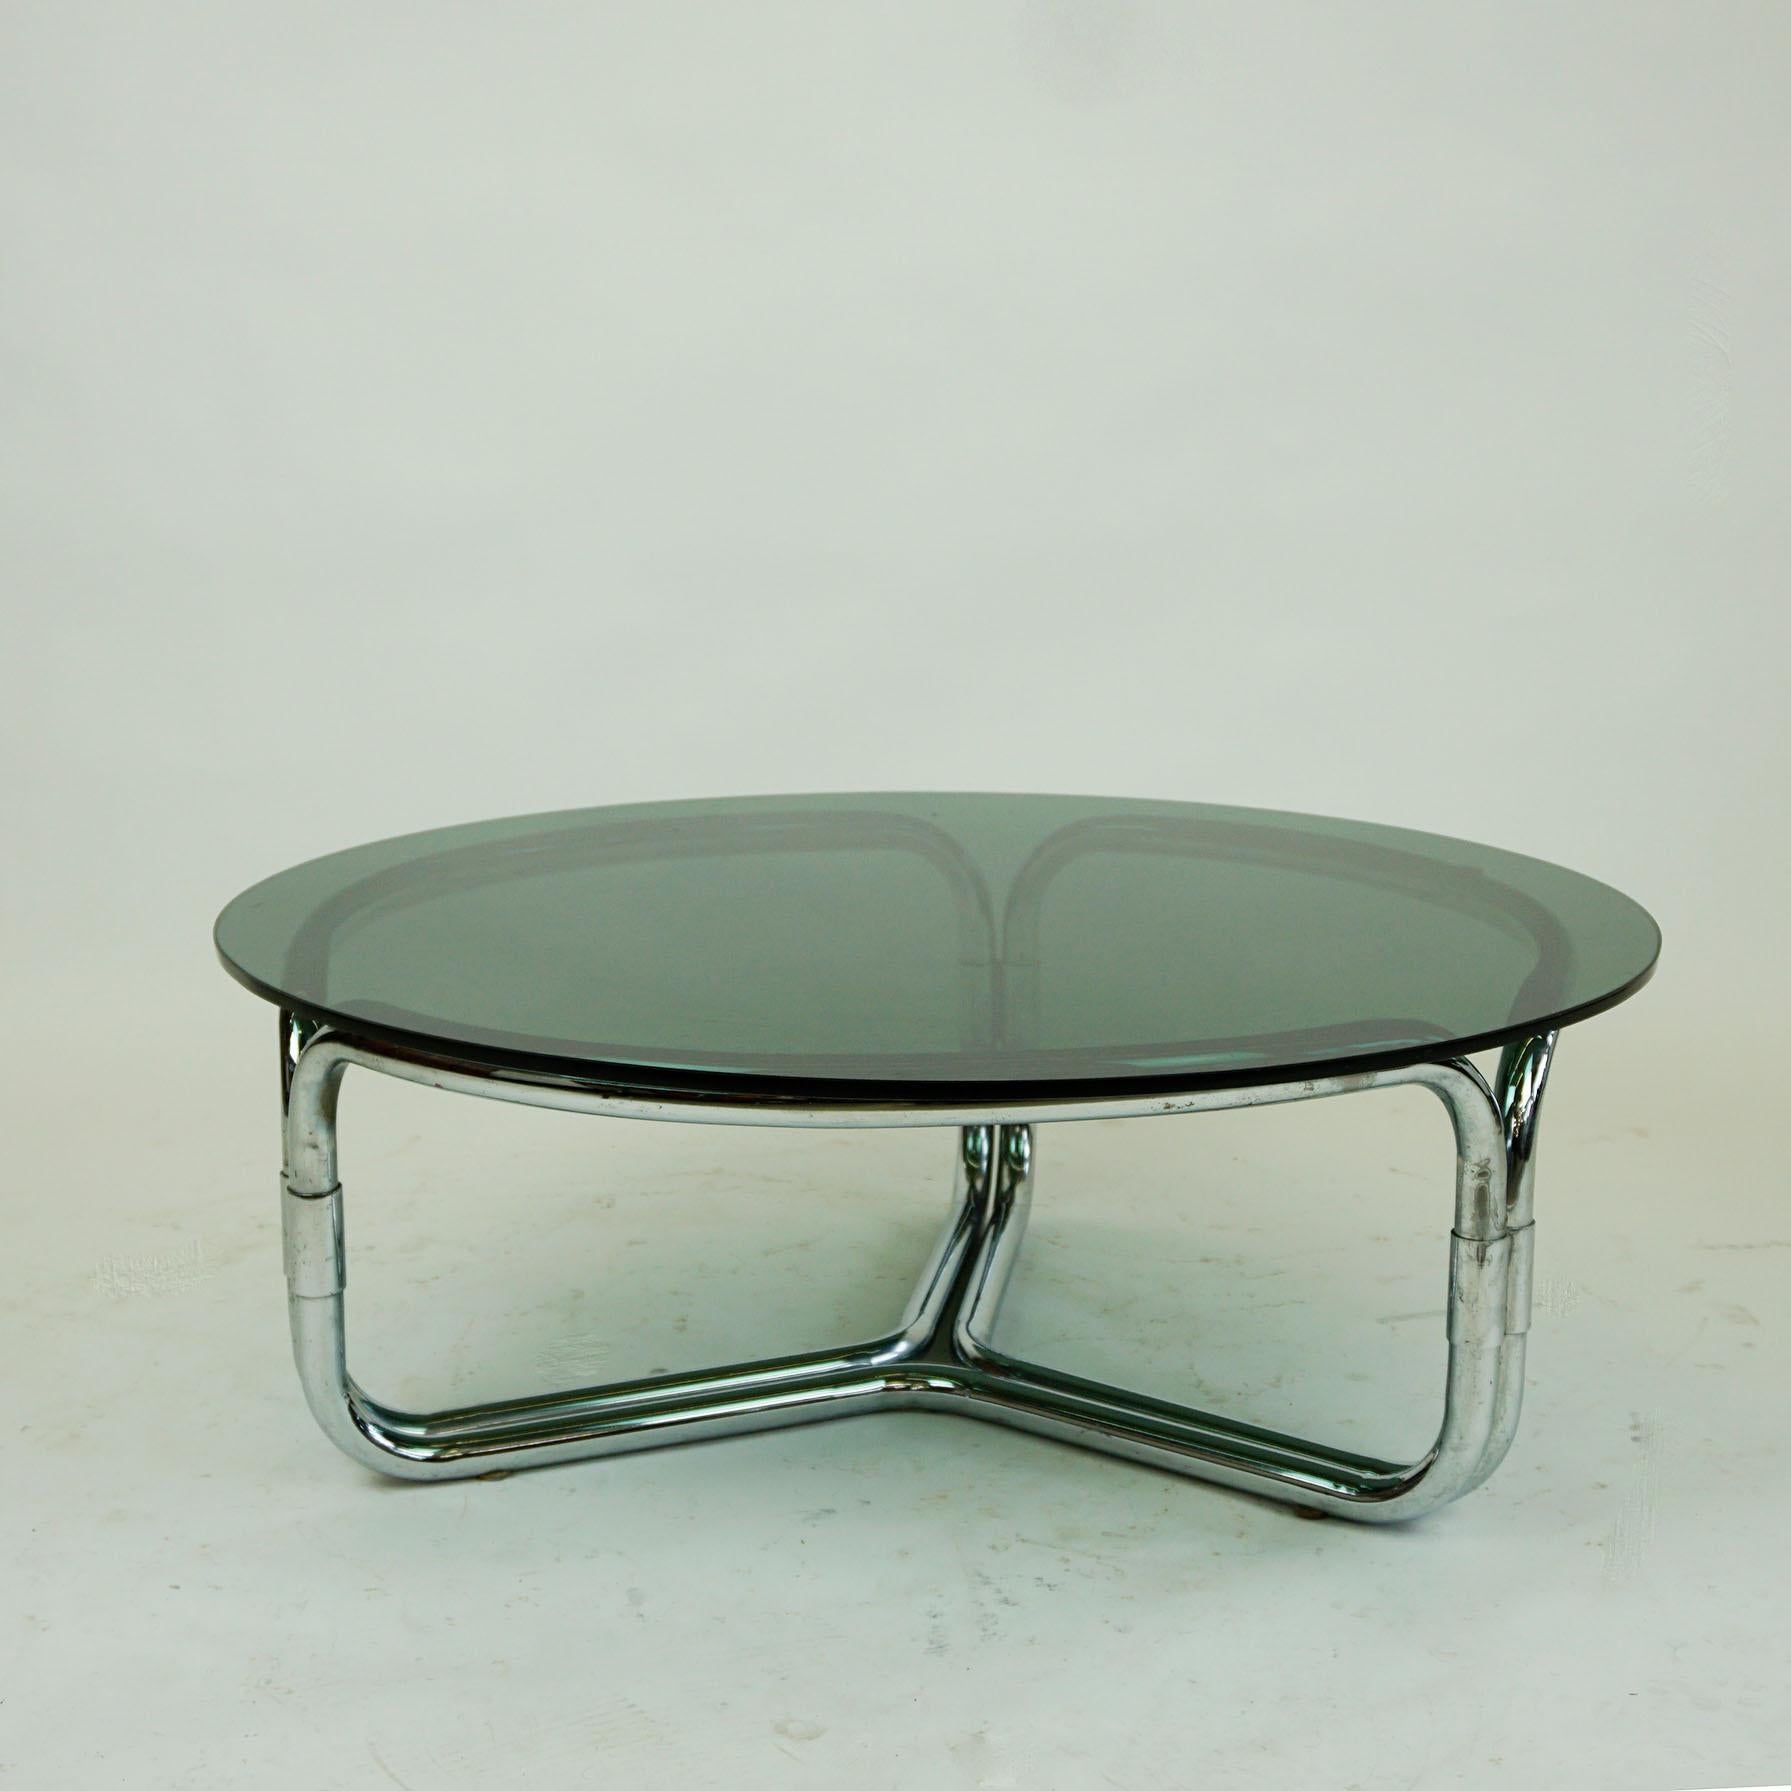 This fantastic midcentury circular Chrome and smoked glass coffee Table has been designed and produced in Italy in the 1970s. It features a tubular chromed base with a glass top.
It´s style is very close to some Designs by Giotto Stoppino.
The